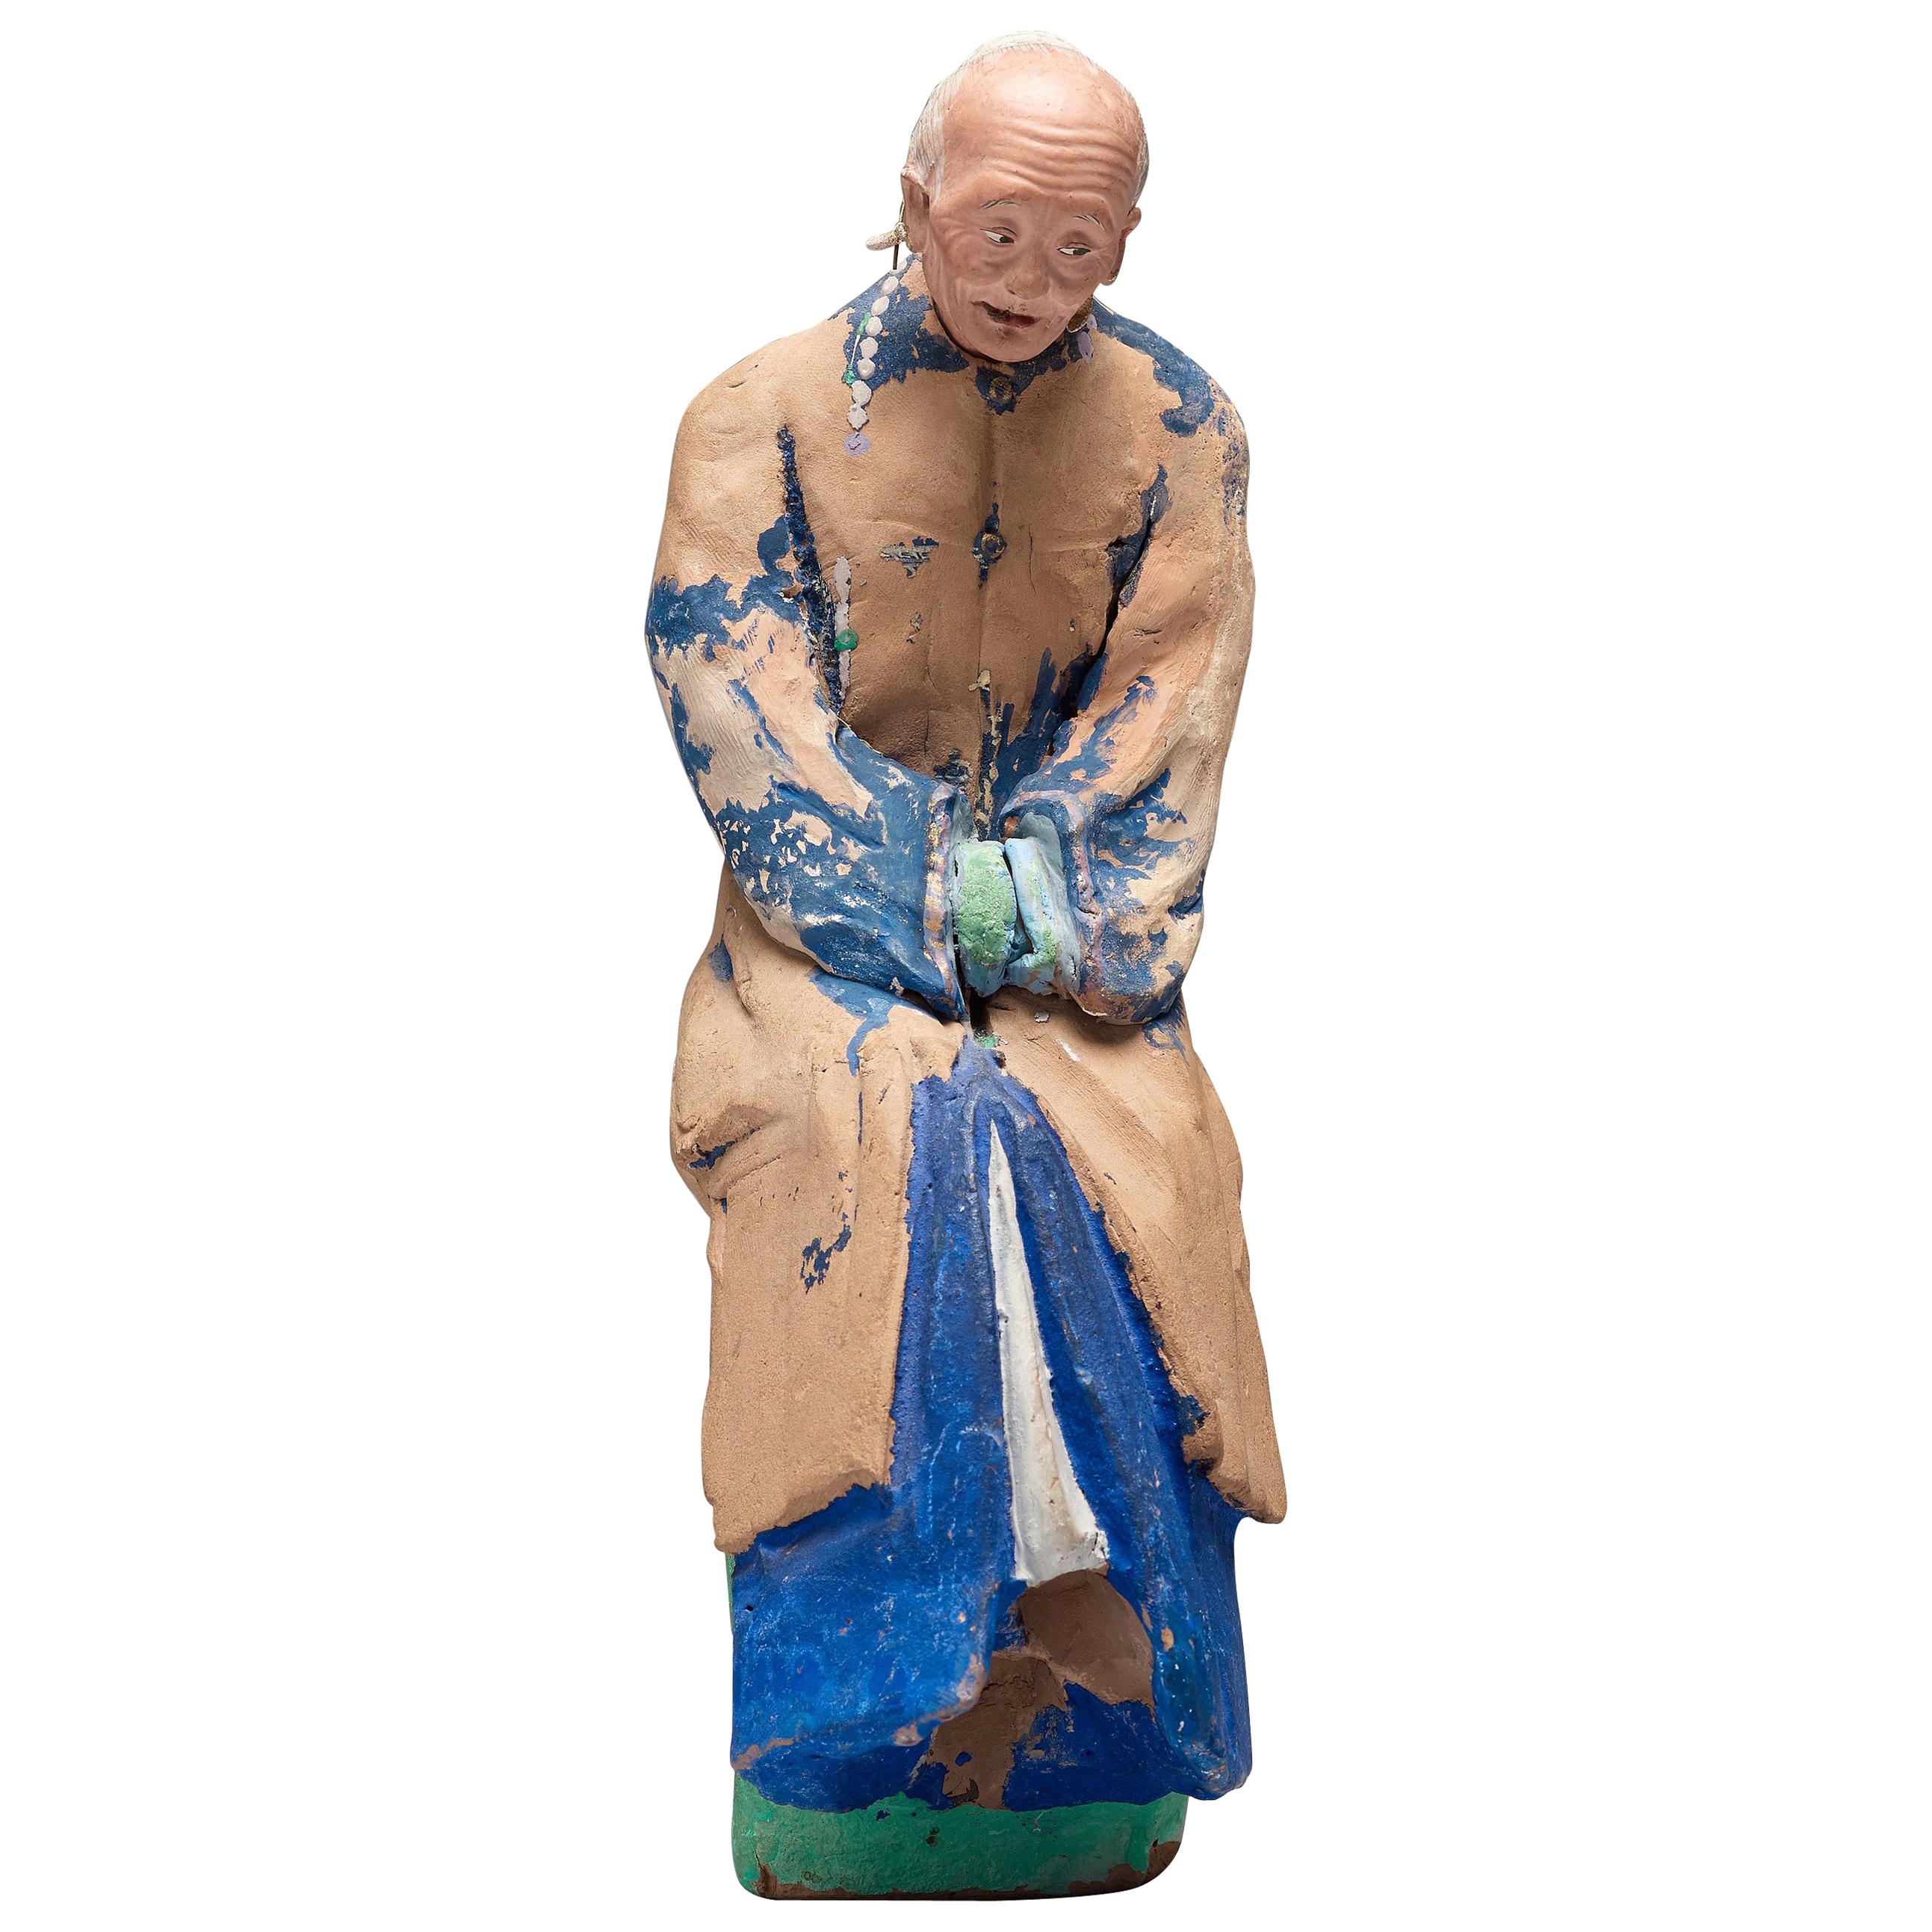 Chinese Sculptured and Painted Clay Figure of an Elderly Man, 19th Century